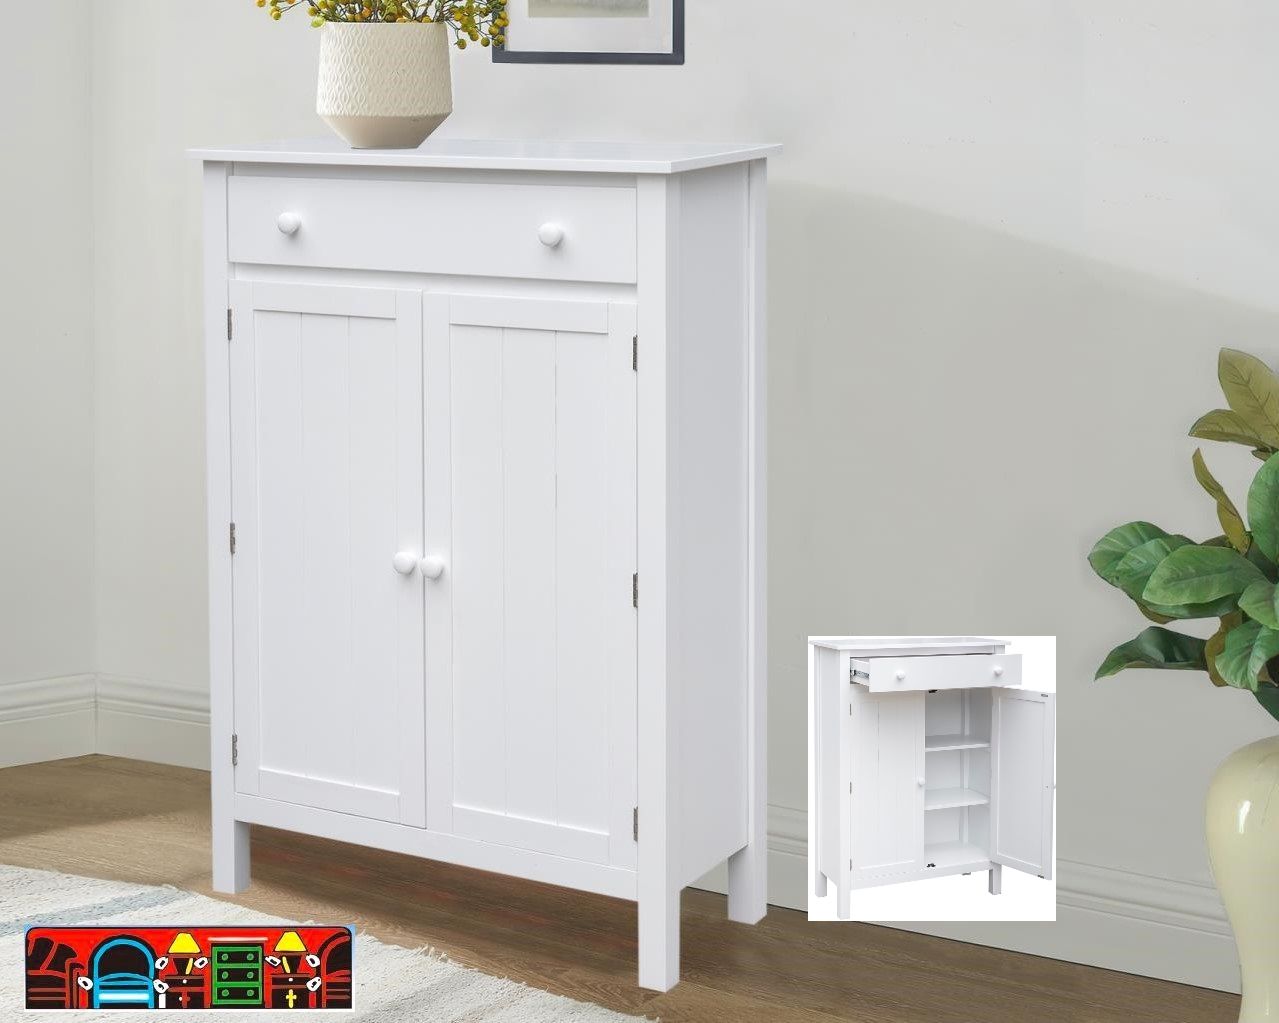 The Seascape Cabinet, crafted from wood and finished in white, features one drawer, two doors, and two shelves. It is available at Bratz-CFW in Fort Myers, FL.